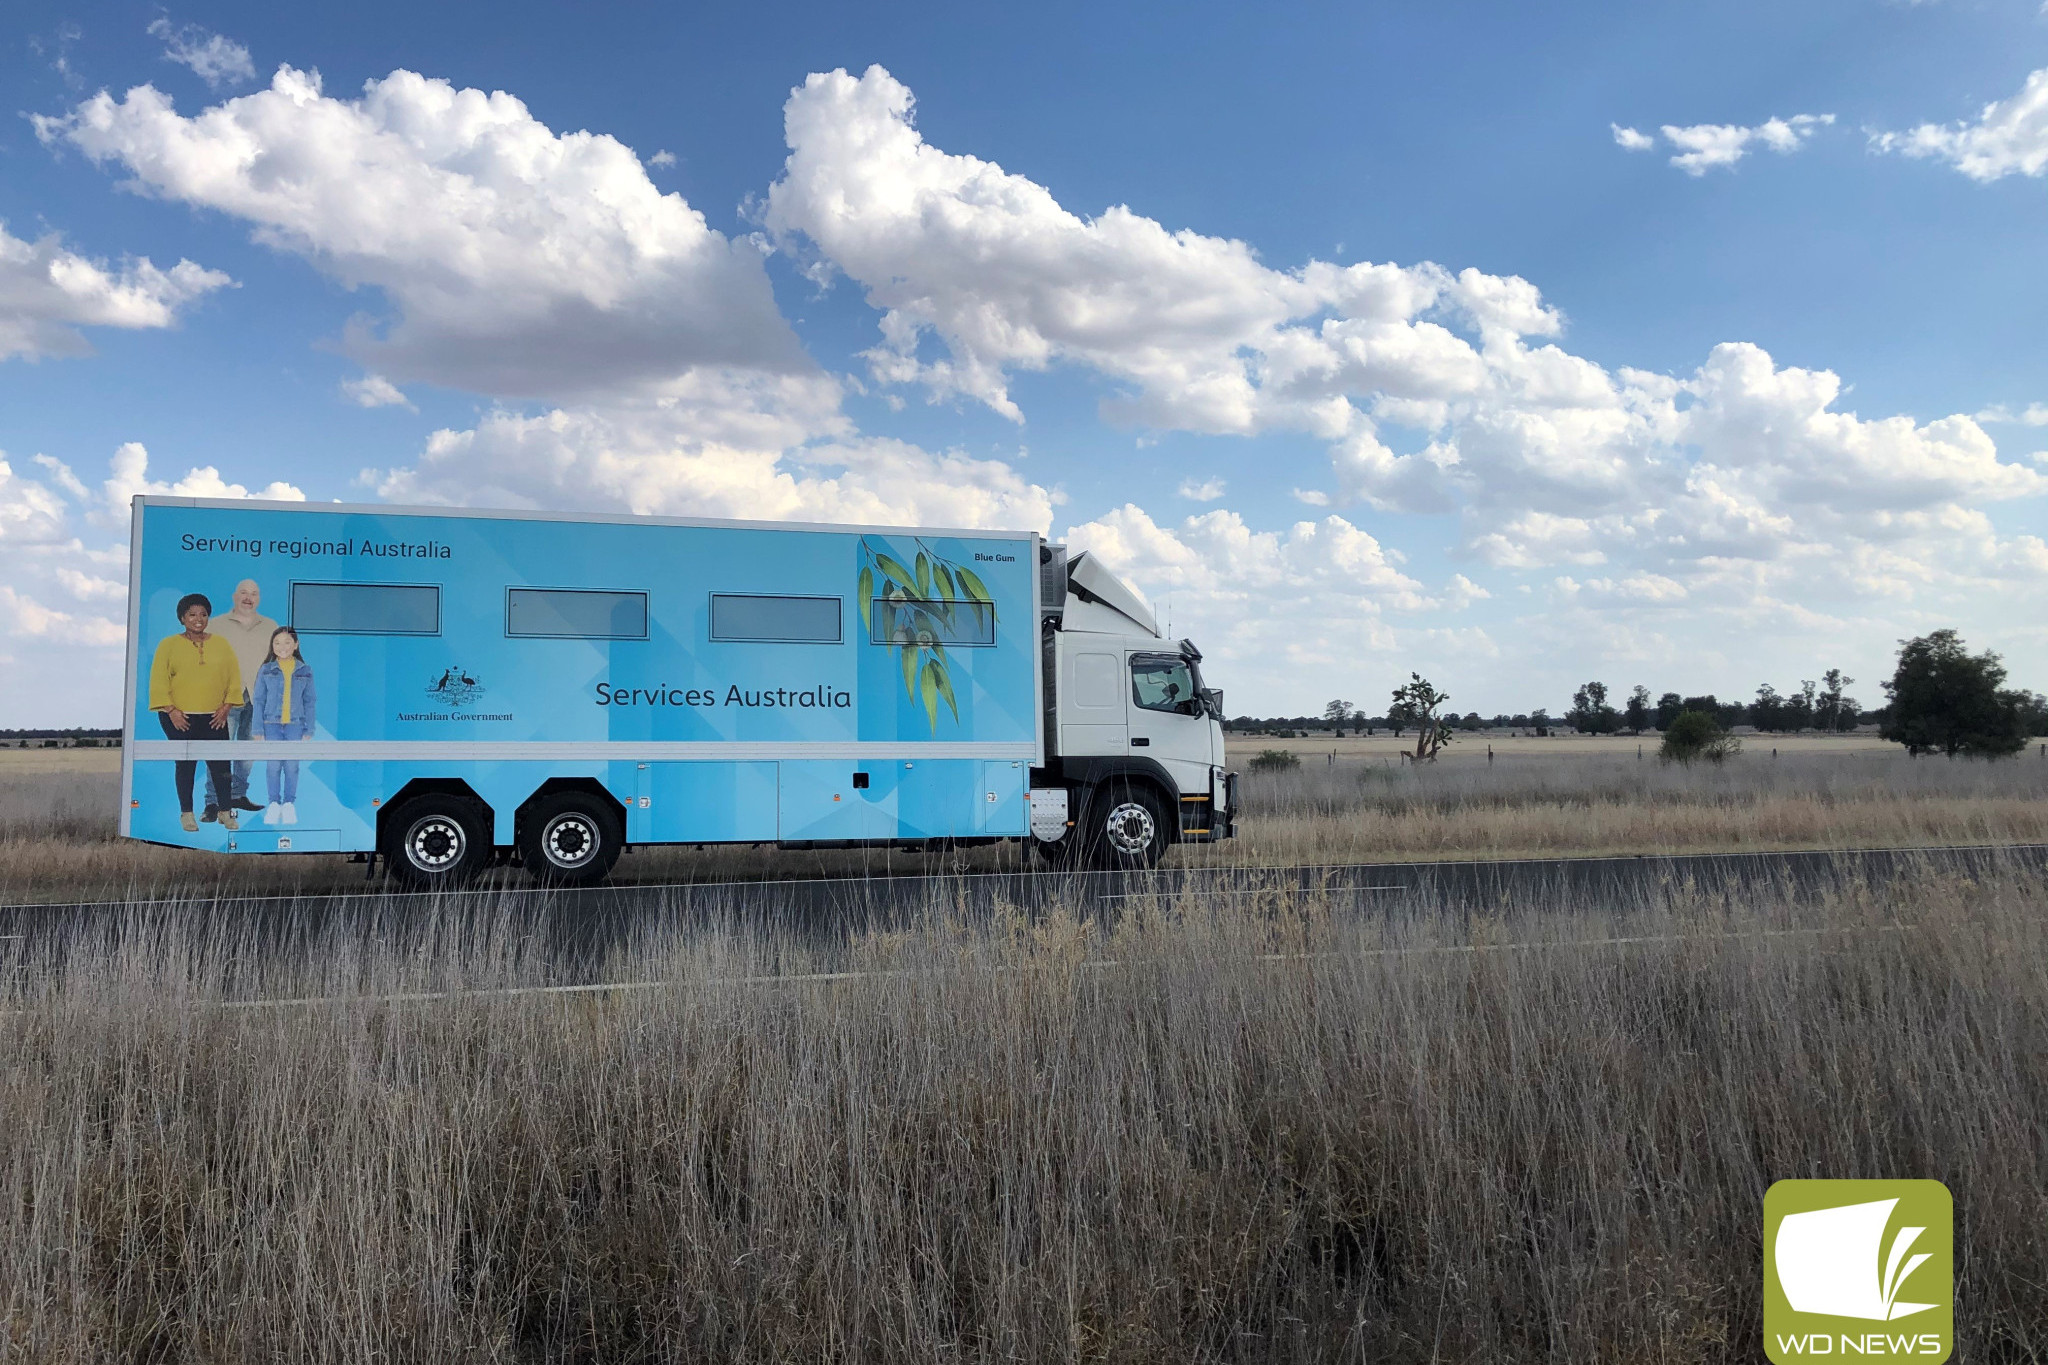 A helpful visit: Services Australia will be bringing its mobile service truck through the area to help residents access government services.